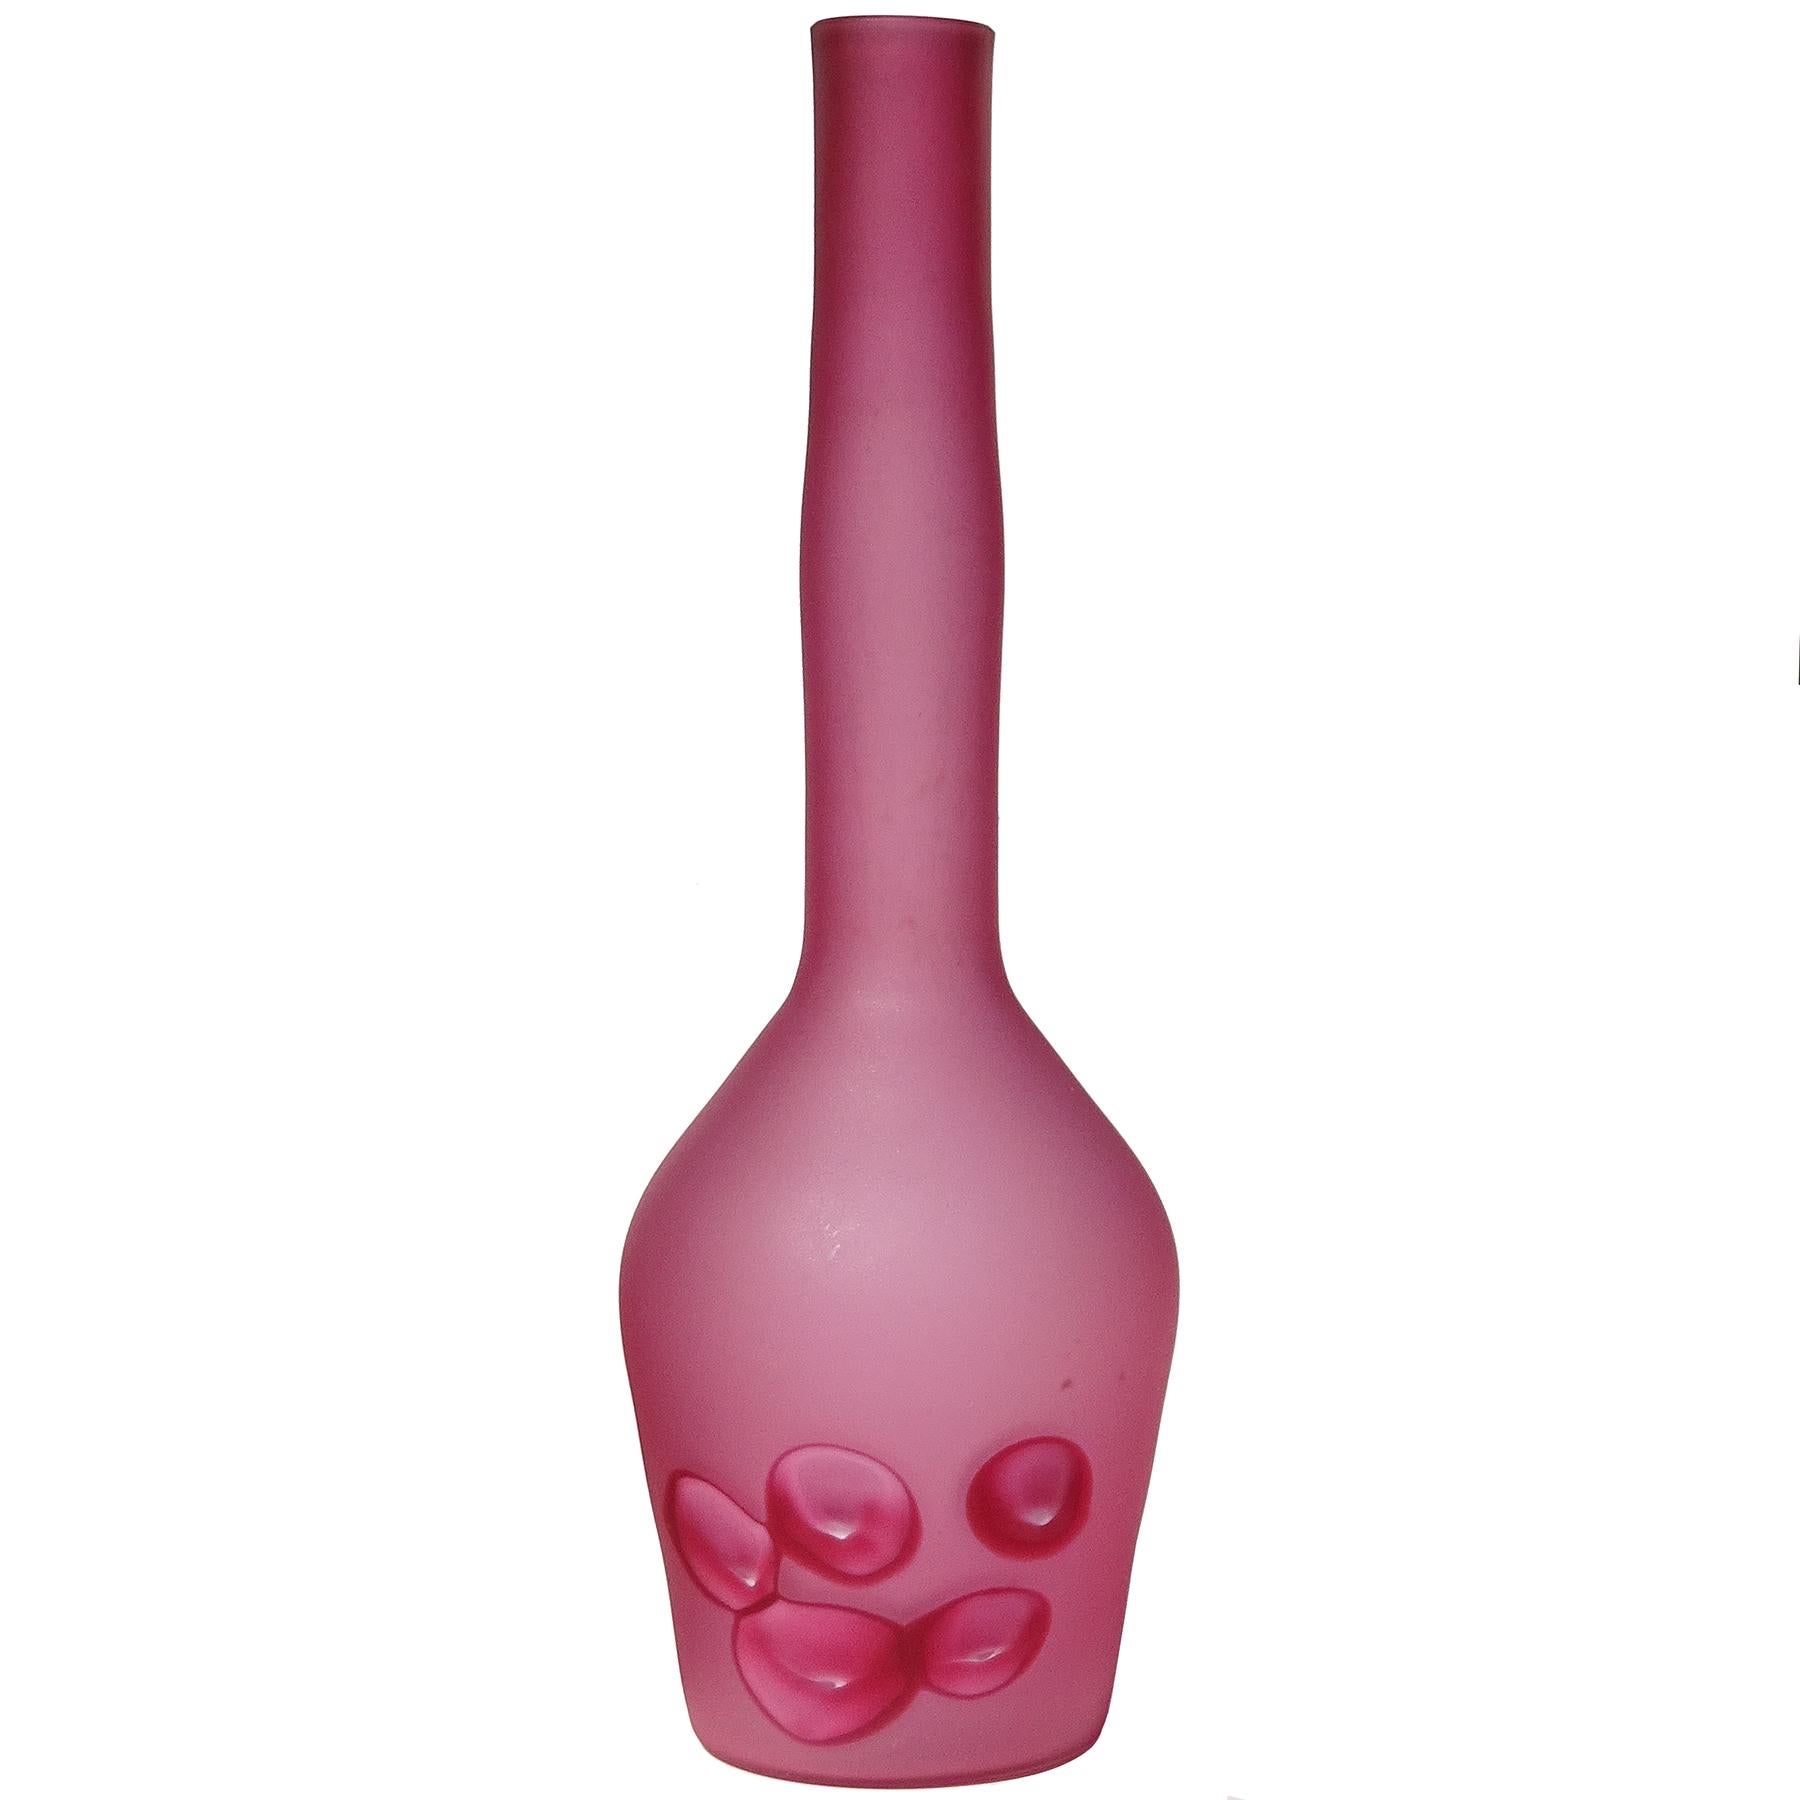 Ermanno Toso Murano Satin Surface Pink Canes Pentoni Italian Art Glass Vase For Sale